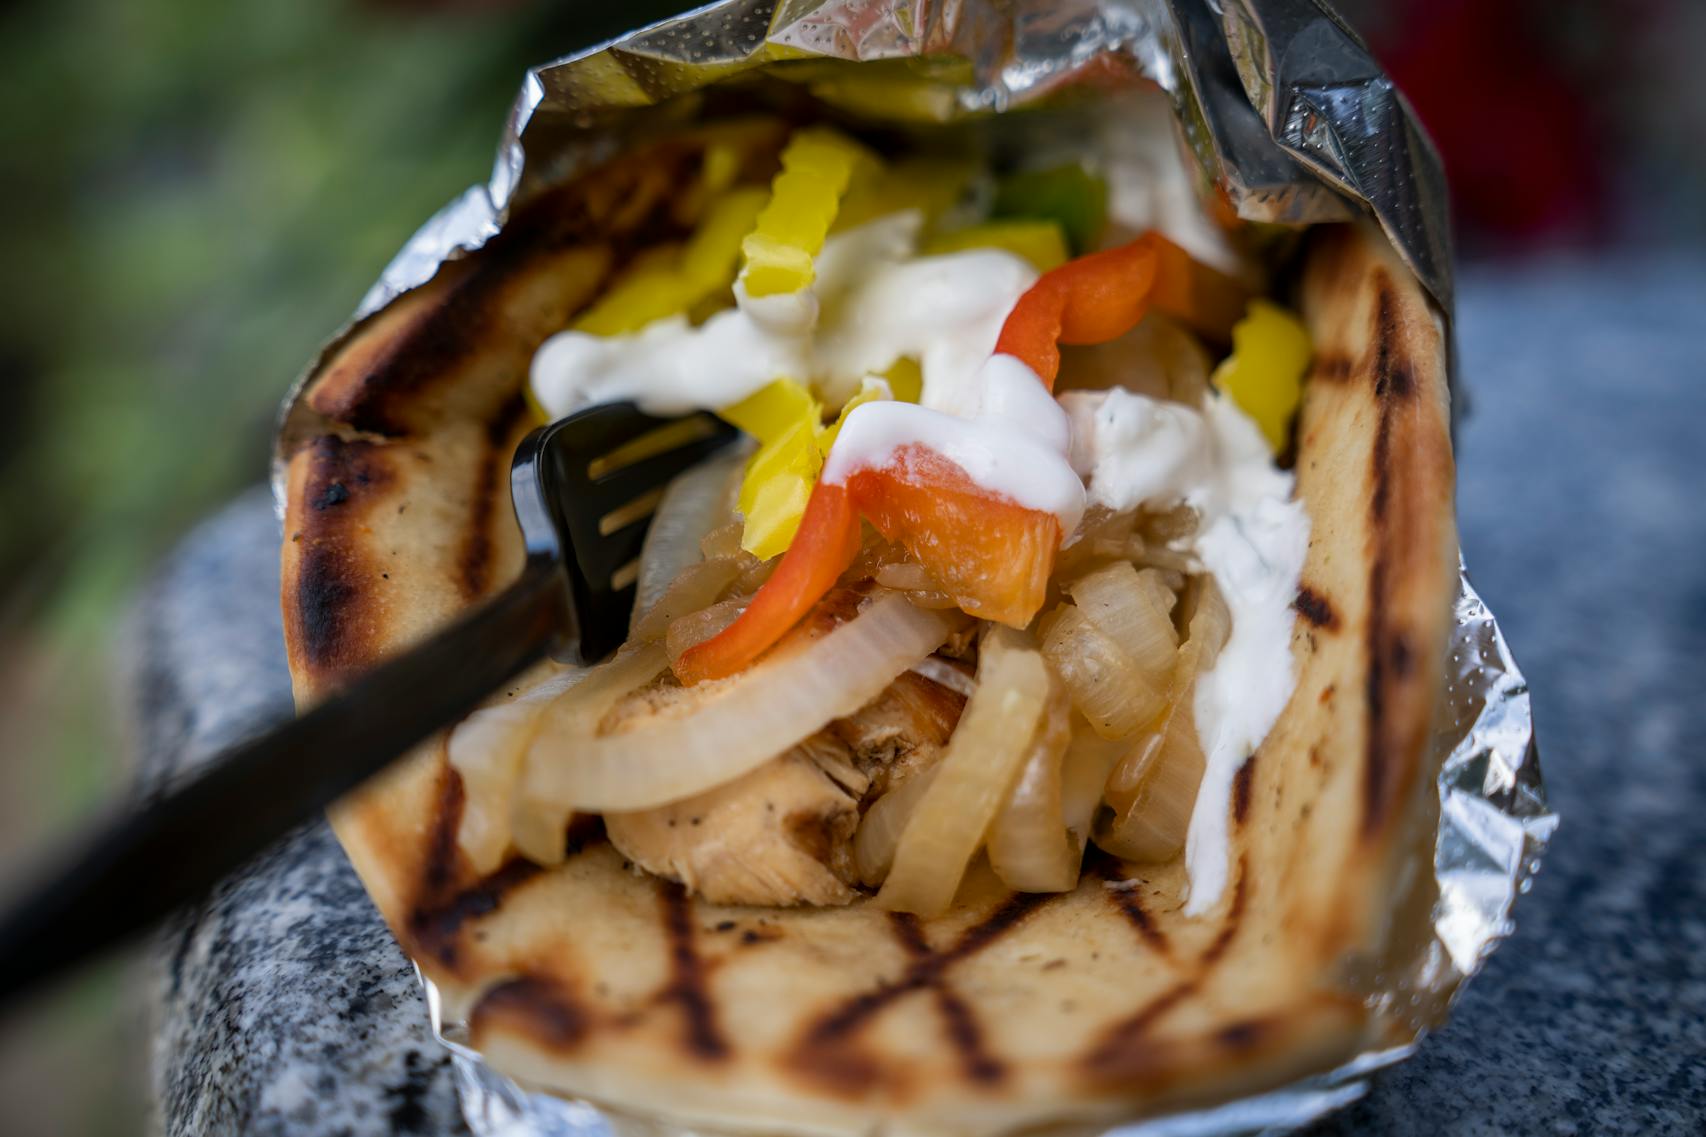 Chicken in-a-Pita from Butcher Boys. The new foods of the 2023 Minnesota State Fair photographed on the first day of the fair in Falcon Heights, Minn. on Tuesday, Aug. 8, 2023. ] LEILA NAVIDI • leila.navidi@startribune.com